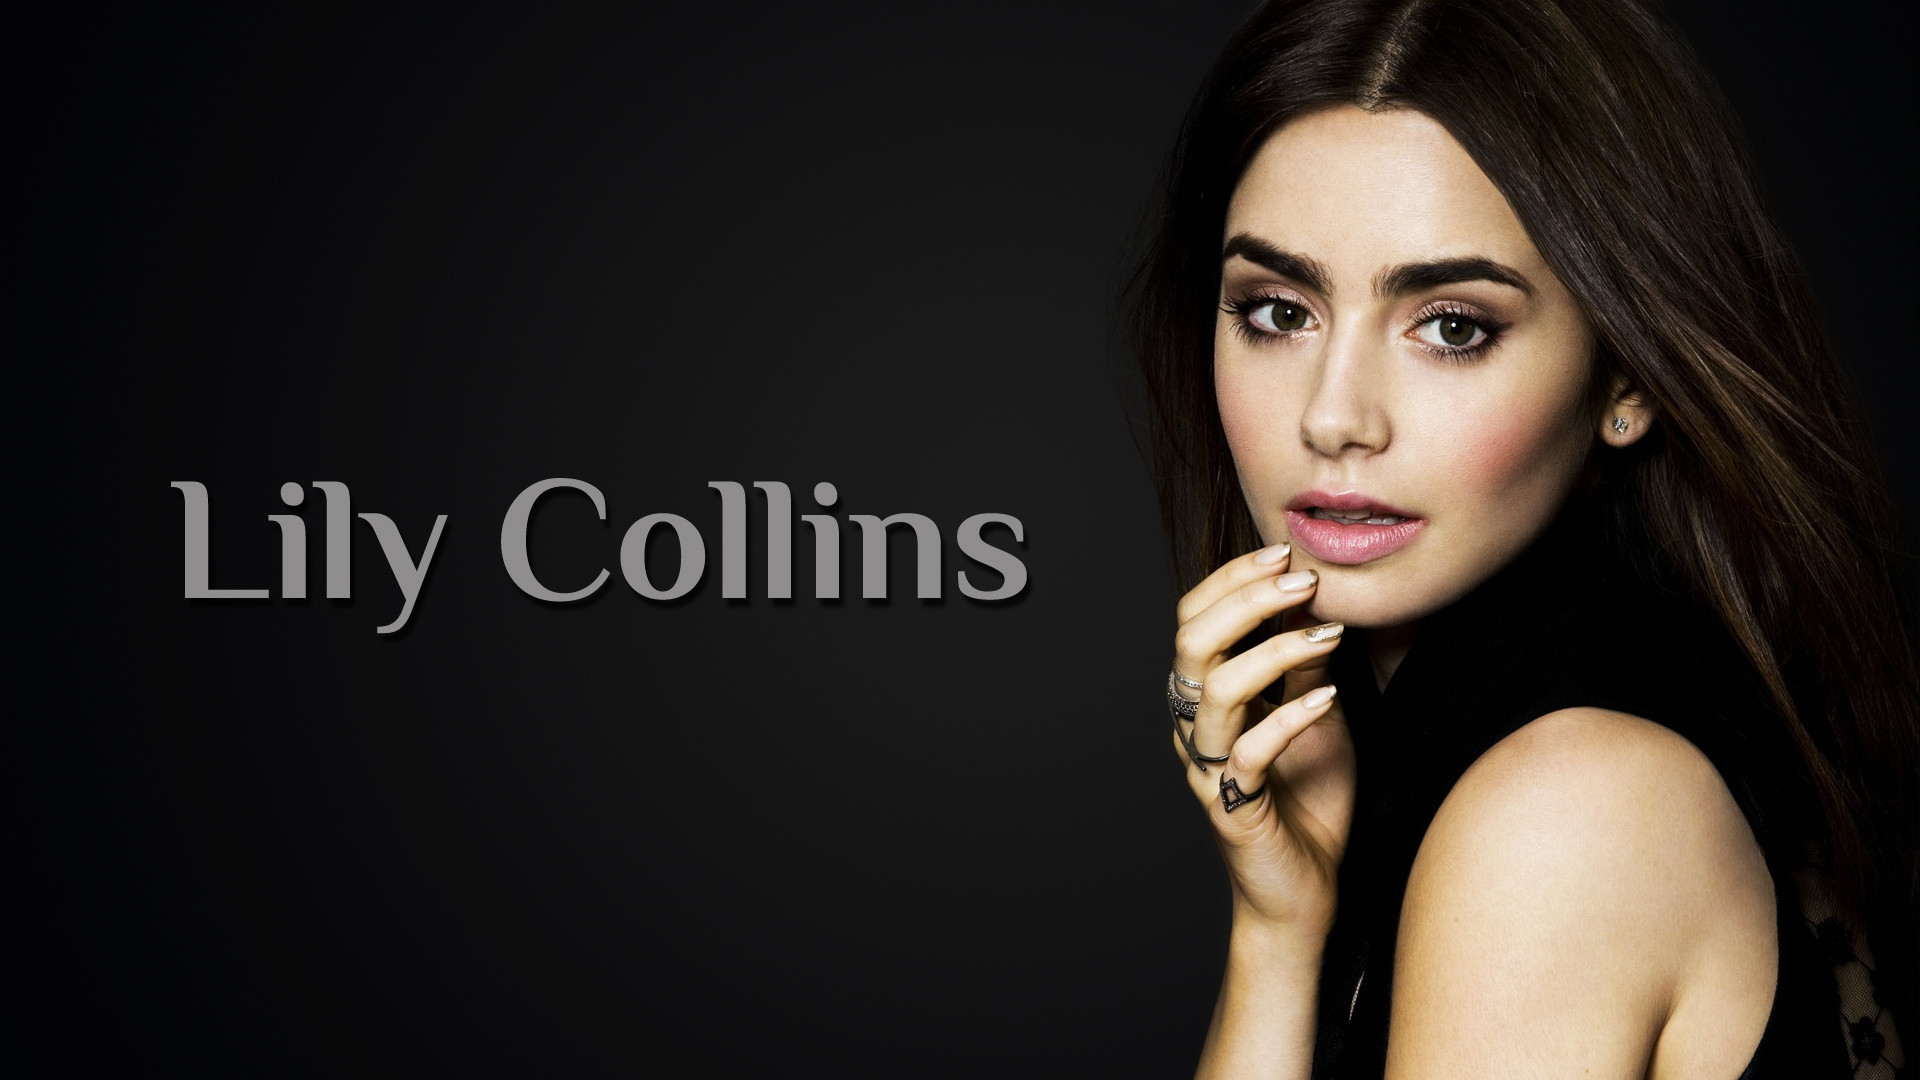 Lily Collins 1920x1080